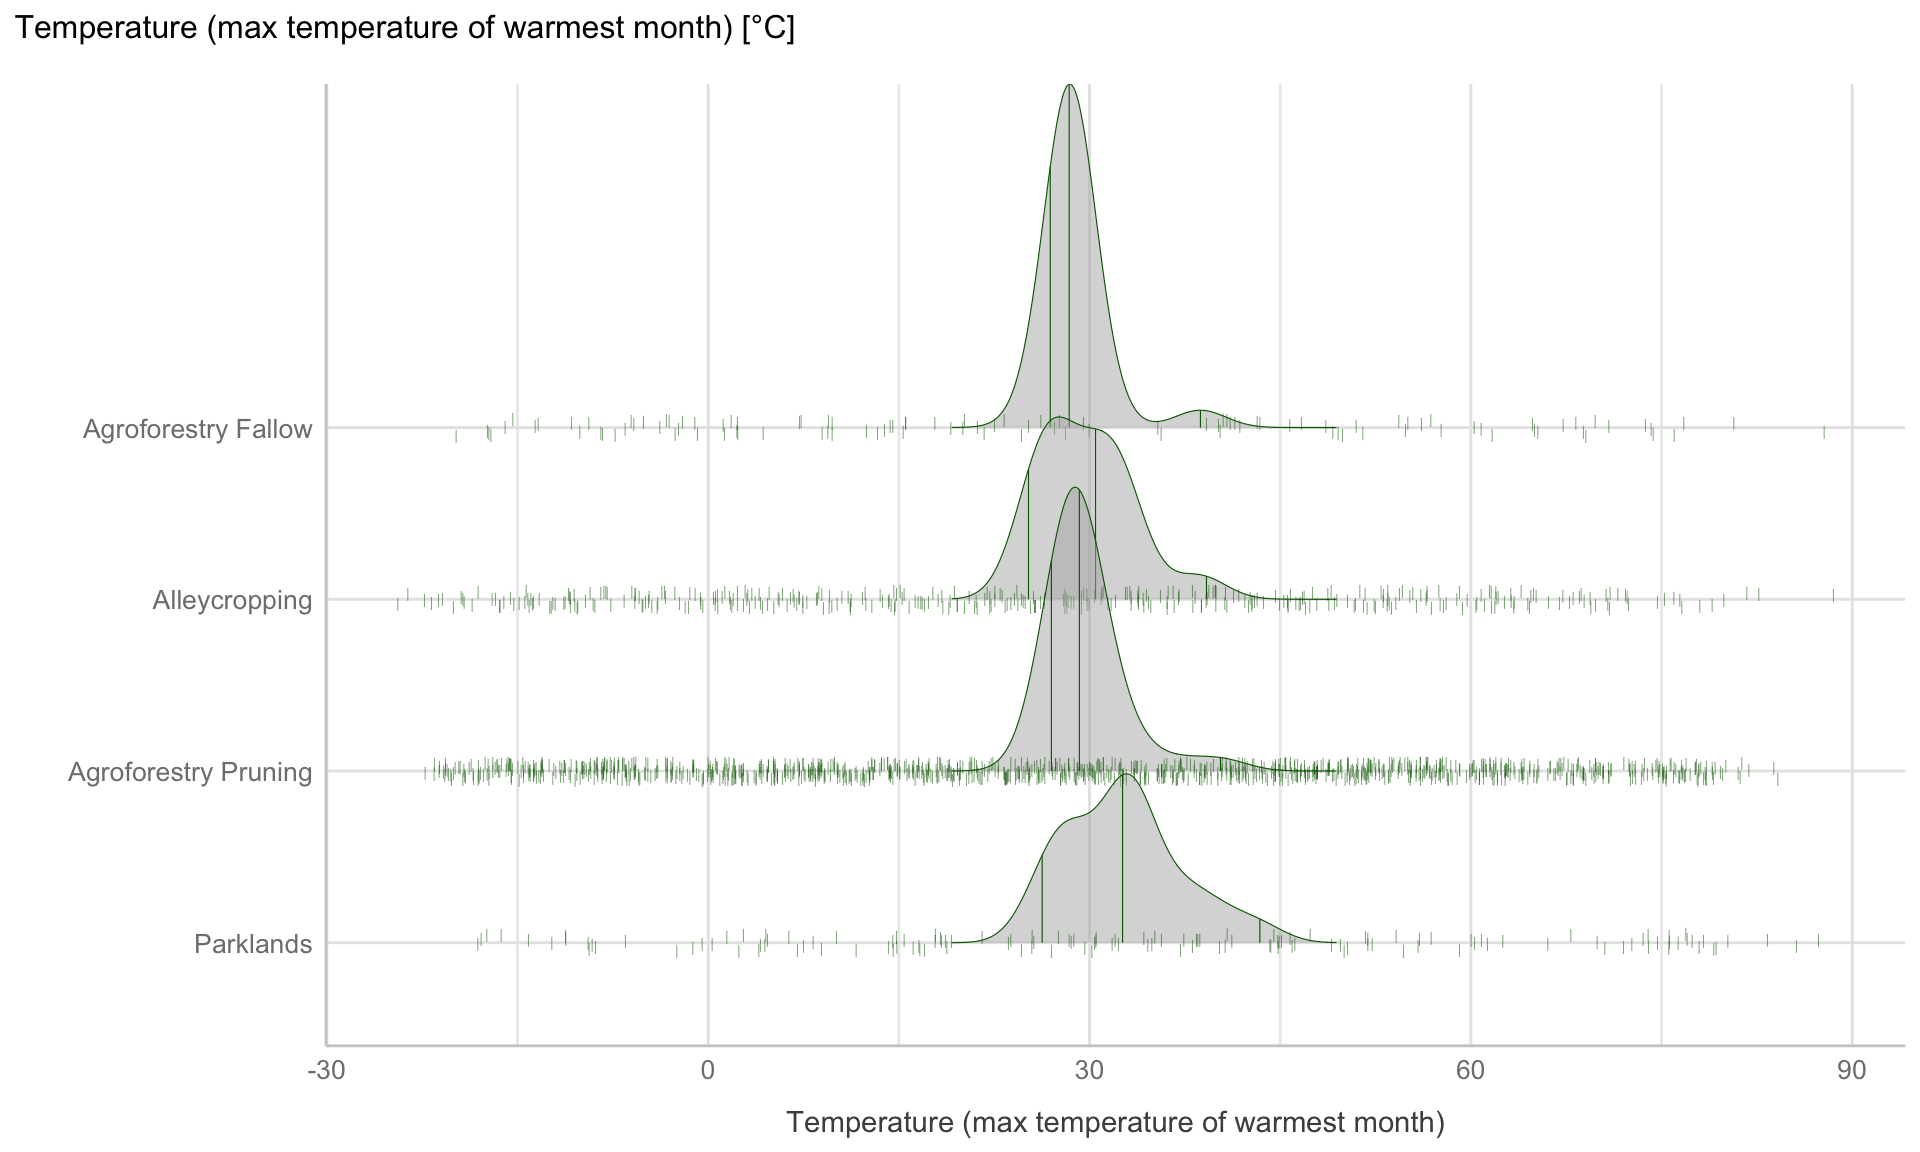 Ridge line plot : Distribution of temperature of warmest month for the four different agroforestry practices